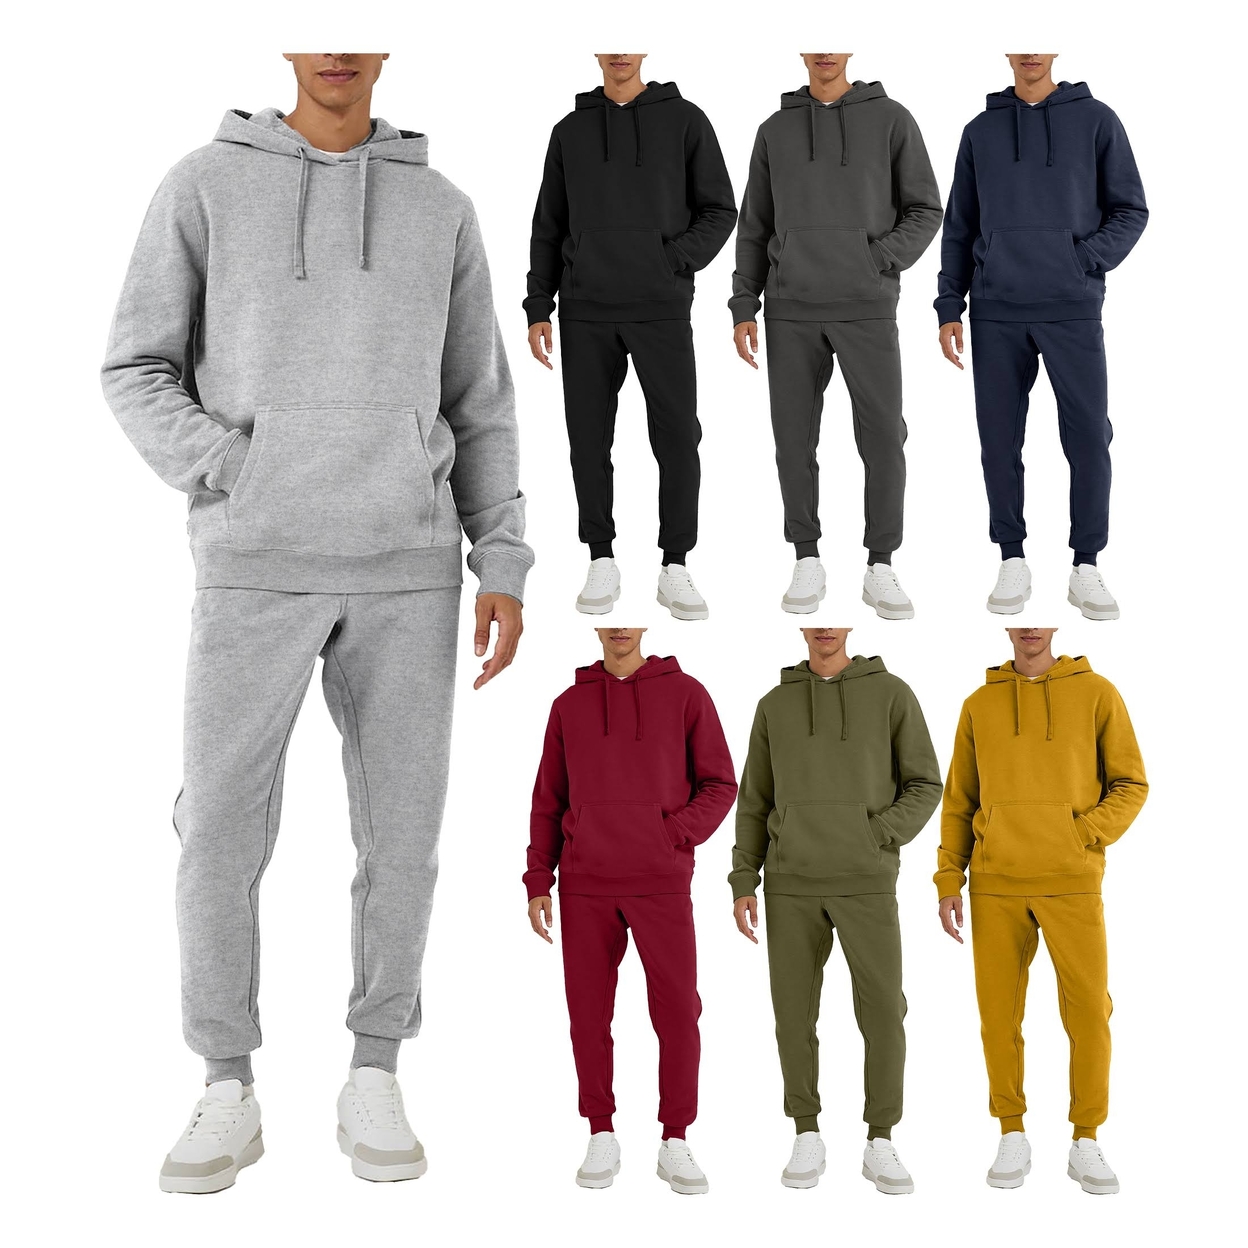 Multi-Pack: Men's Big & Tall Athletic Active Jogging Winter Warm Fleece Lined Pullover Tracksuit Set - Grey, 1-pack, Small